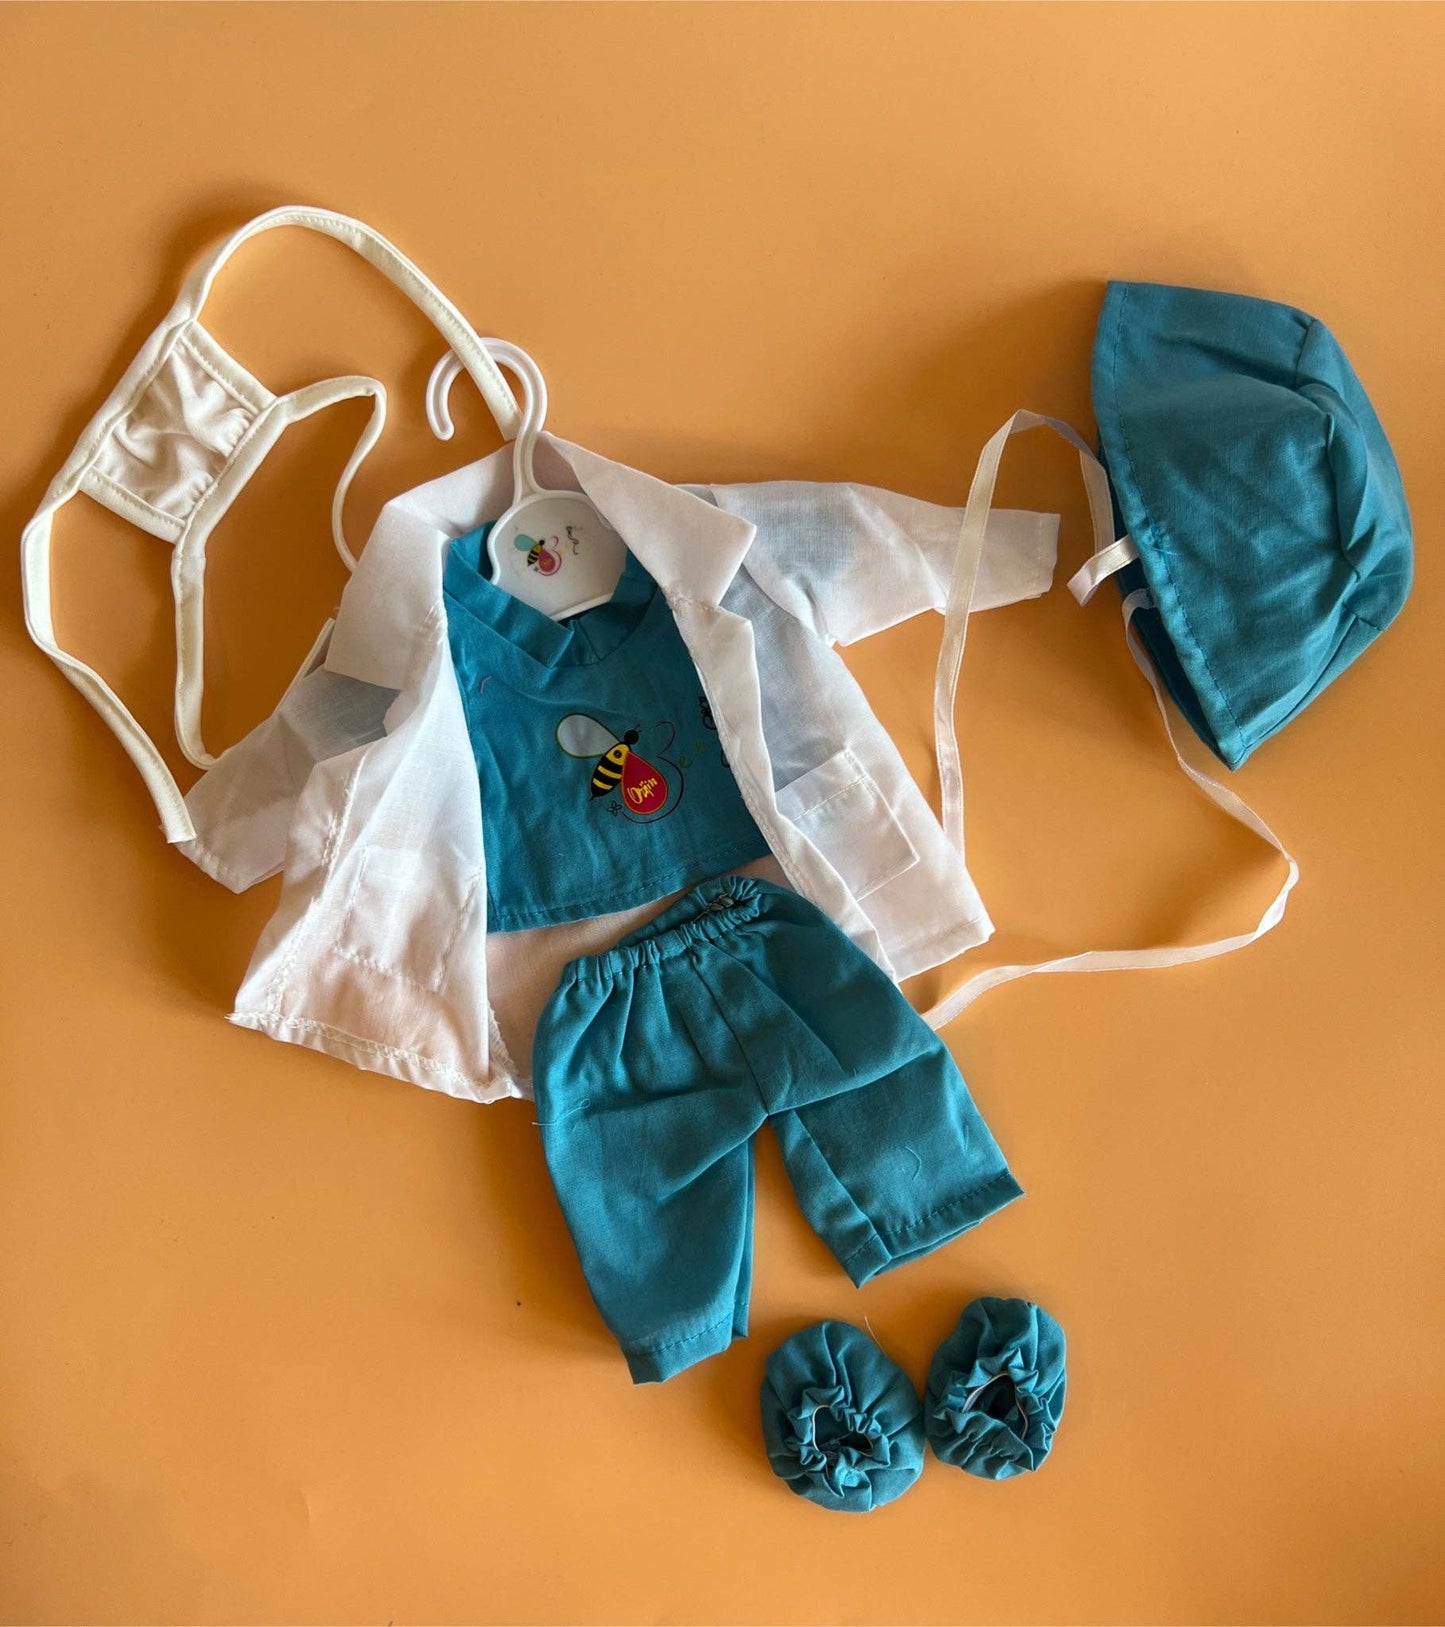 8 Piece Healthcare Hero Outfit (doll sold separately): Pink